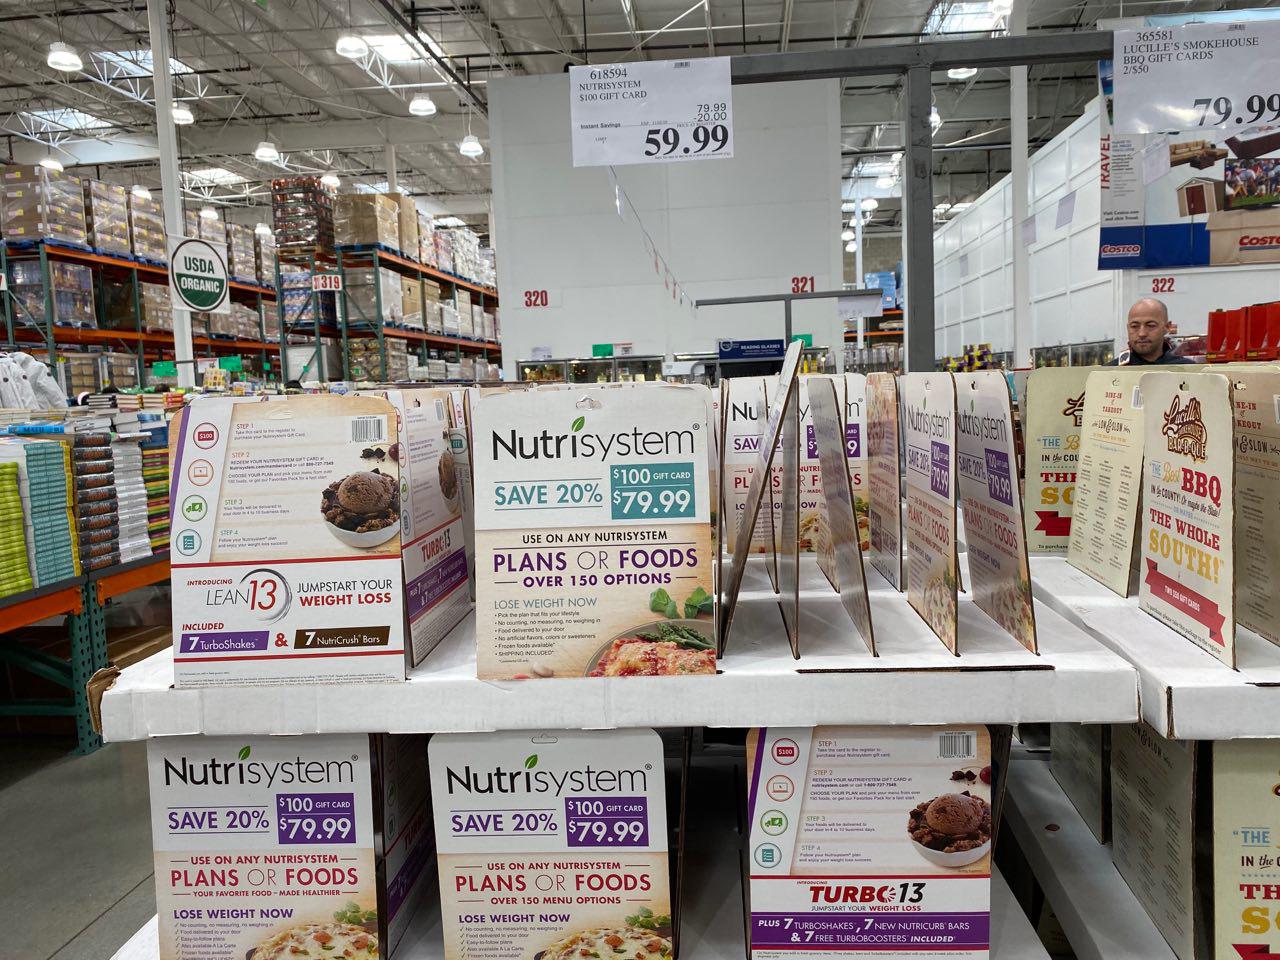 Costco Nutrisystem Meal Plan Gift Cards